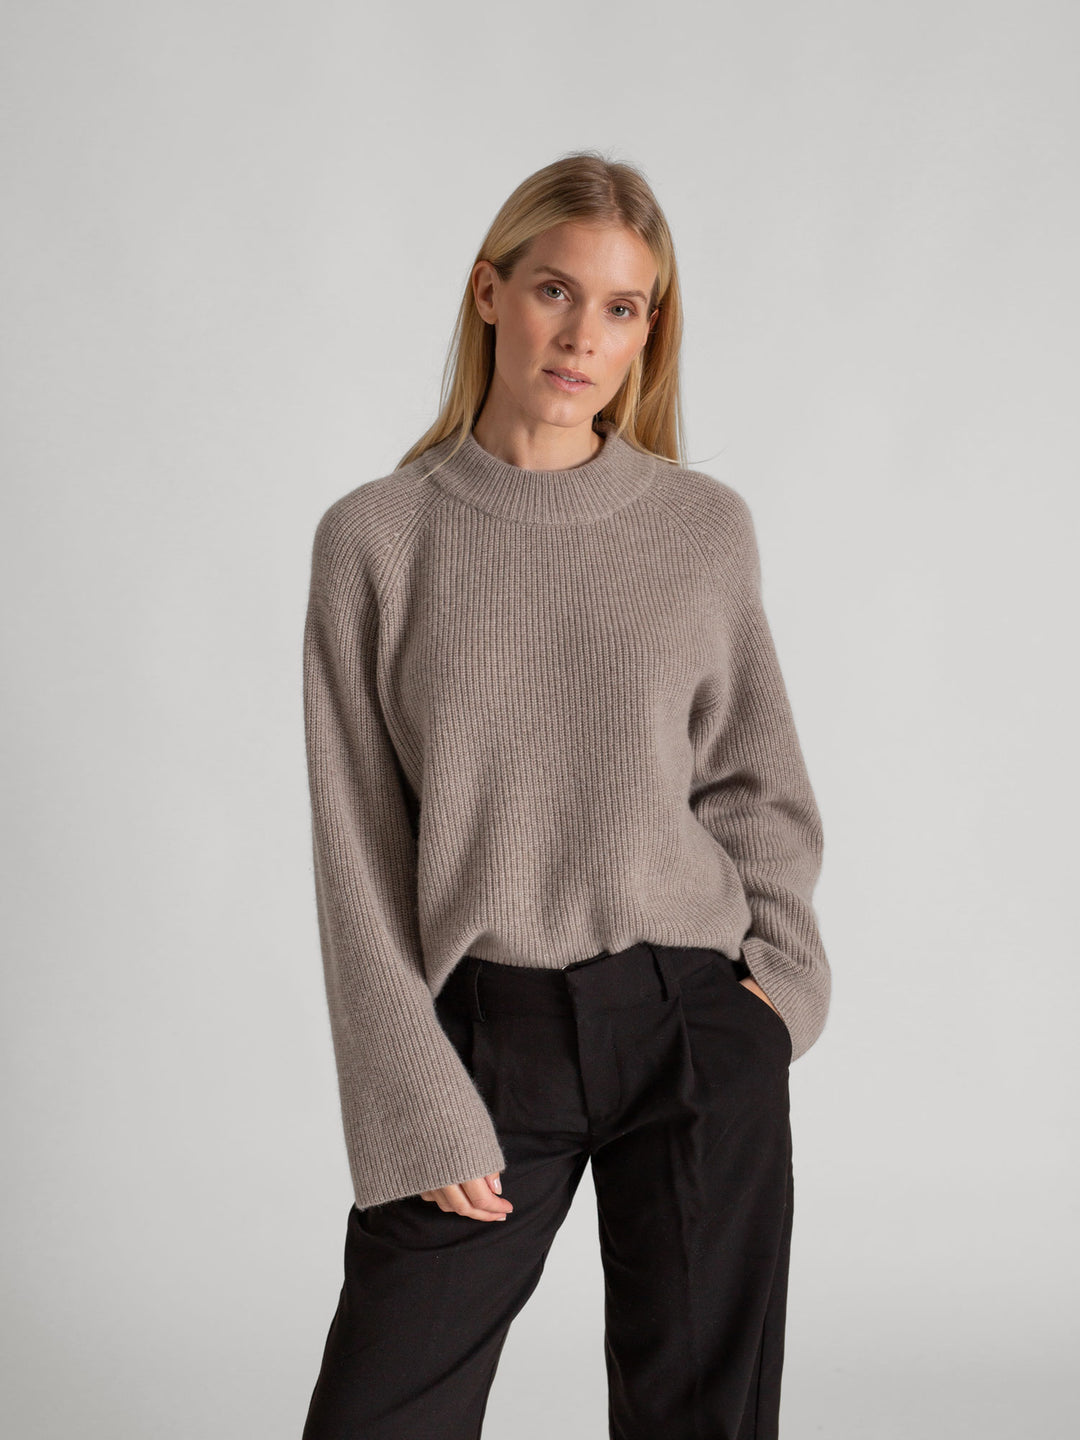 Rib knitted cashmere sweater "Idun" in 100% pure cashmere. Scandinavian design by Kashmina. Color: Toast.